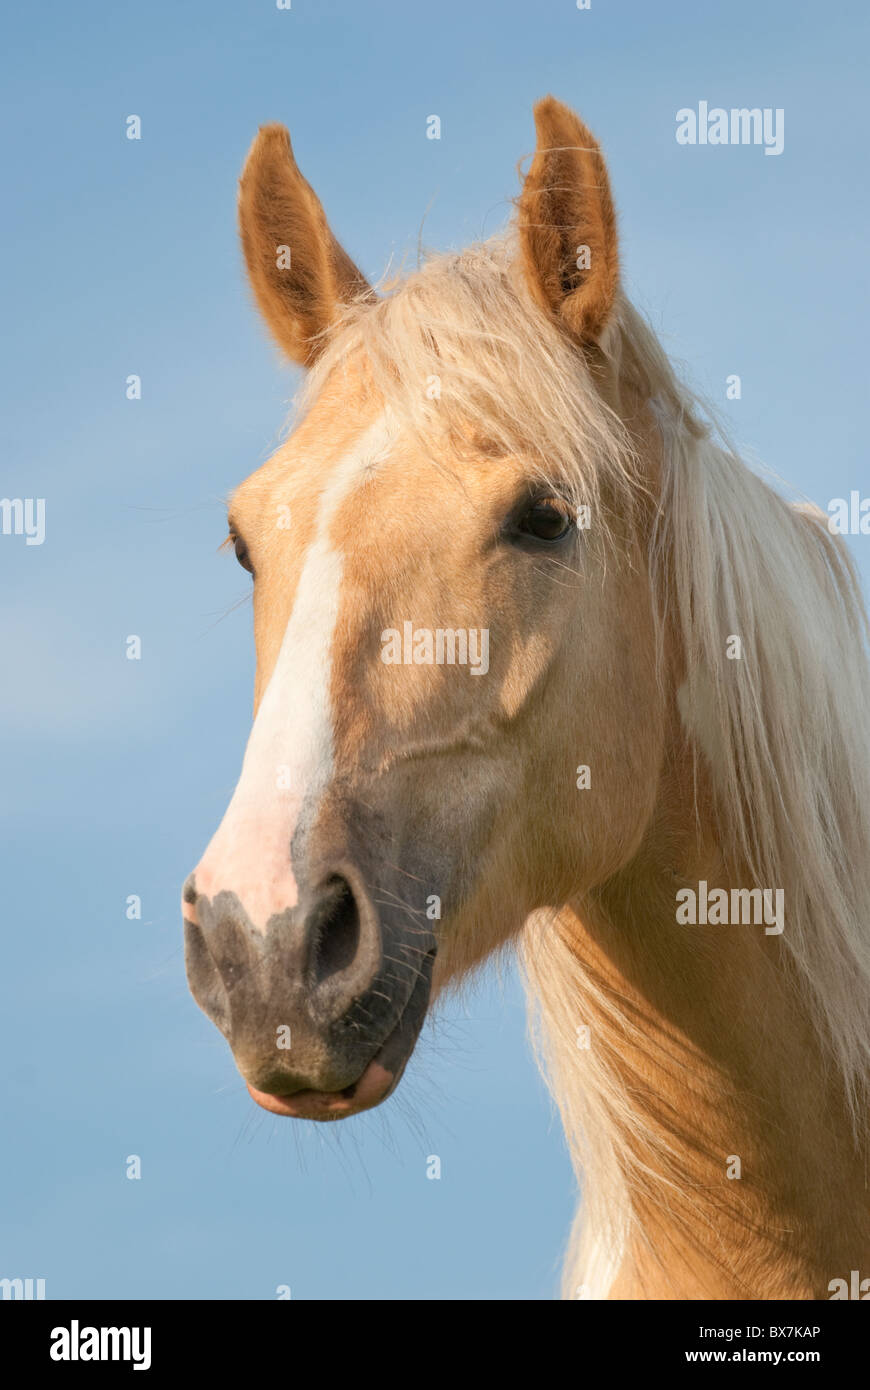 Palomino horse head shot, handsome portrait with wind blowing through long mane and forelock, Pennsylvania, USA. Stock Photo